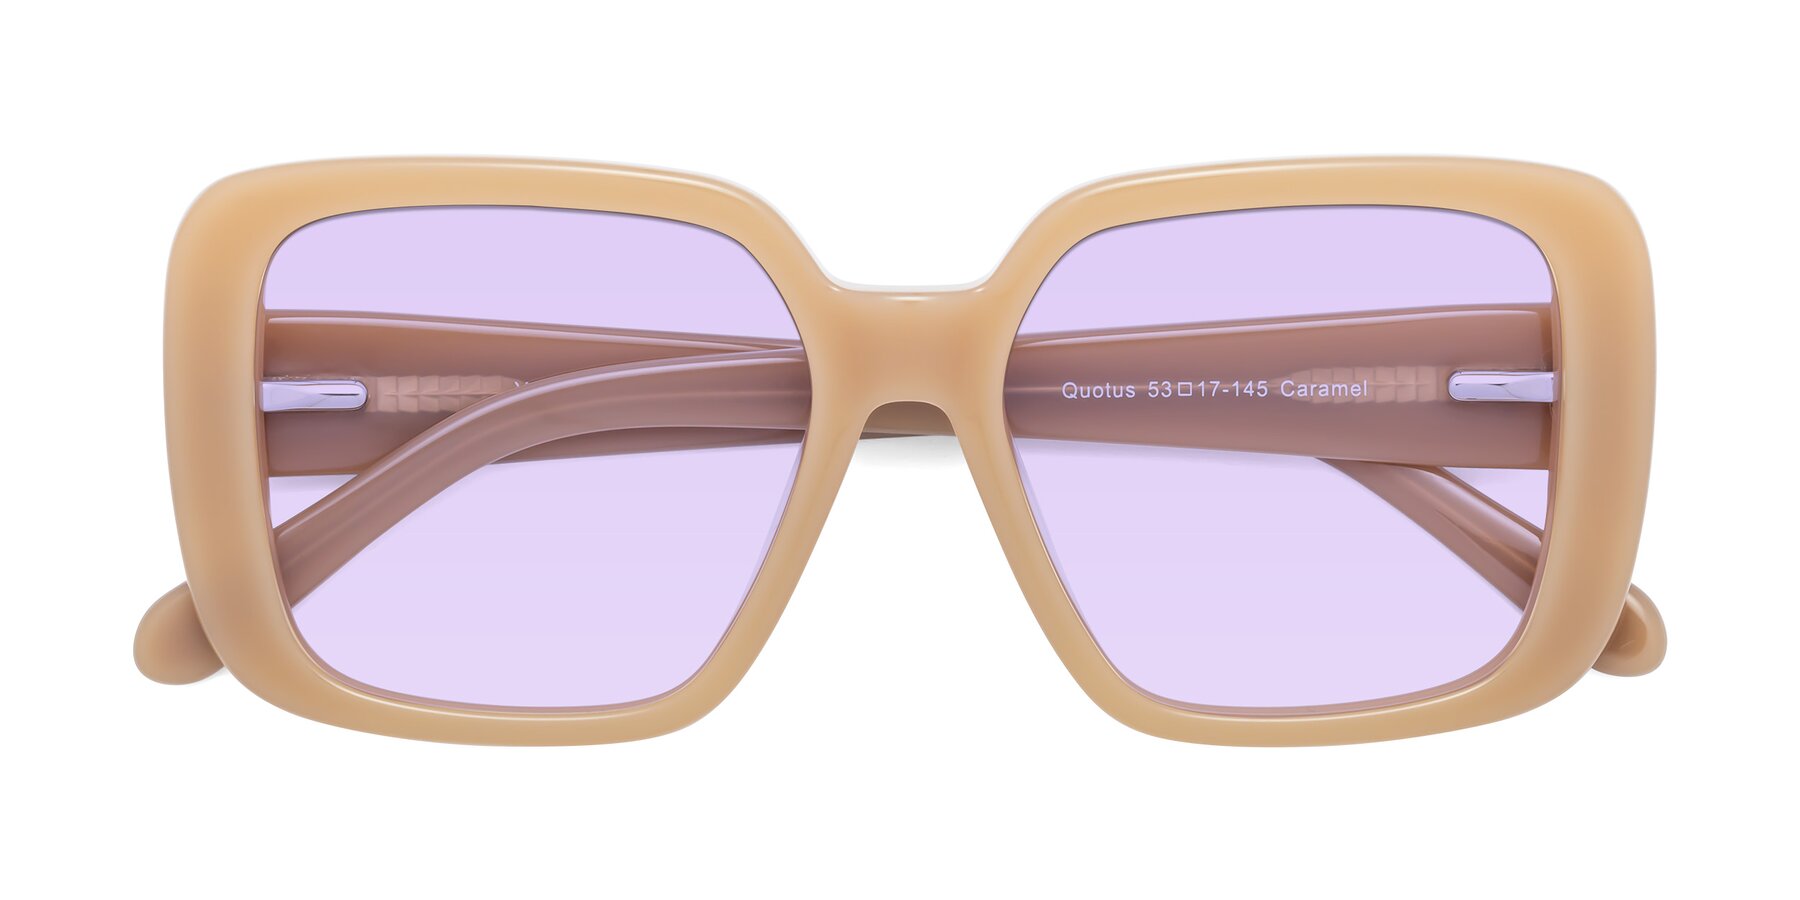 Folded Front of Quotus in Caramel with Light Purple Tinted Lenses